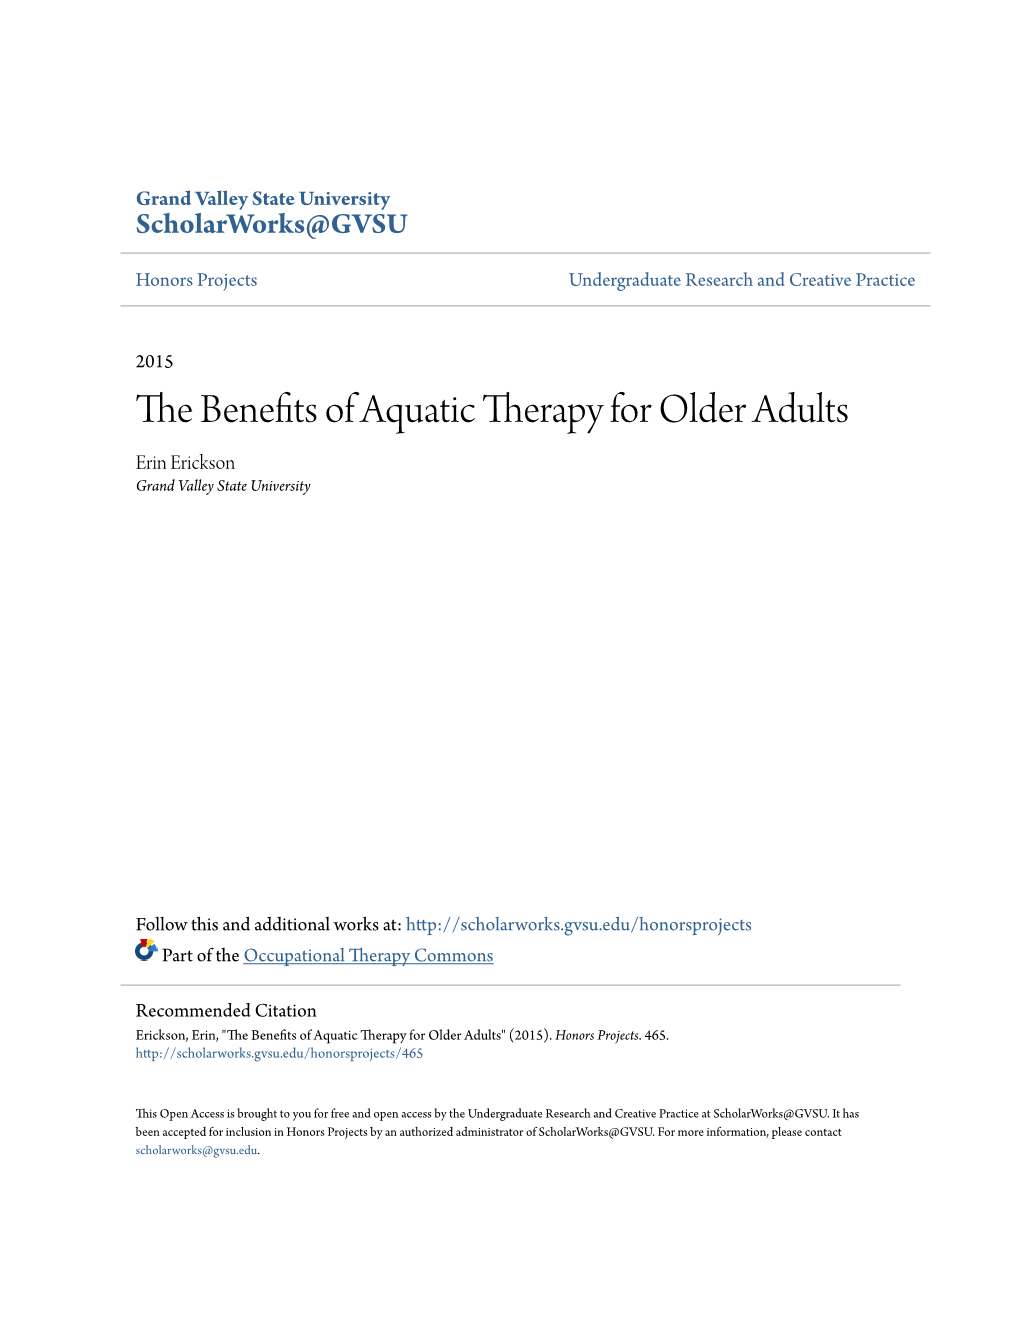 The Benefits of Aquatic Therapy for Older Adults Erin Erickson Grand Valley State University